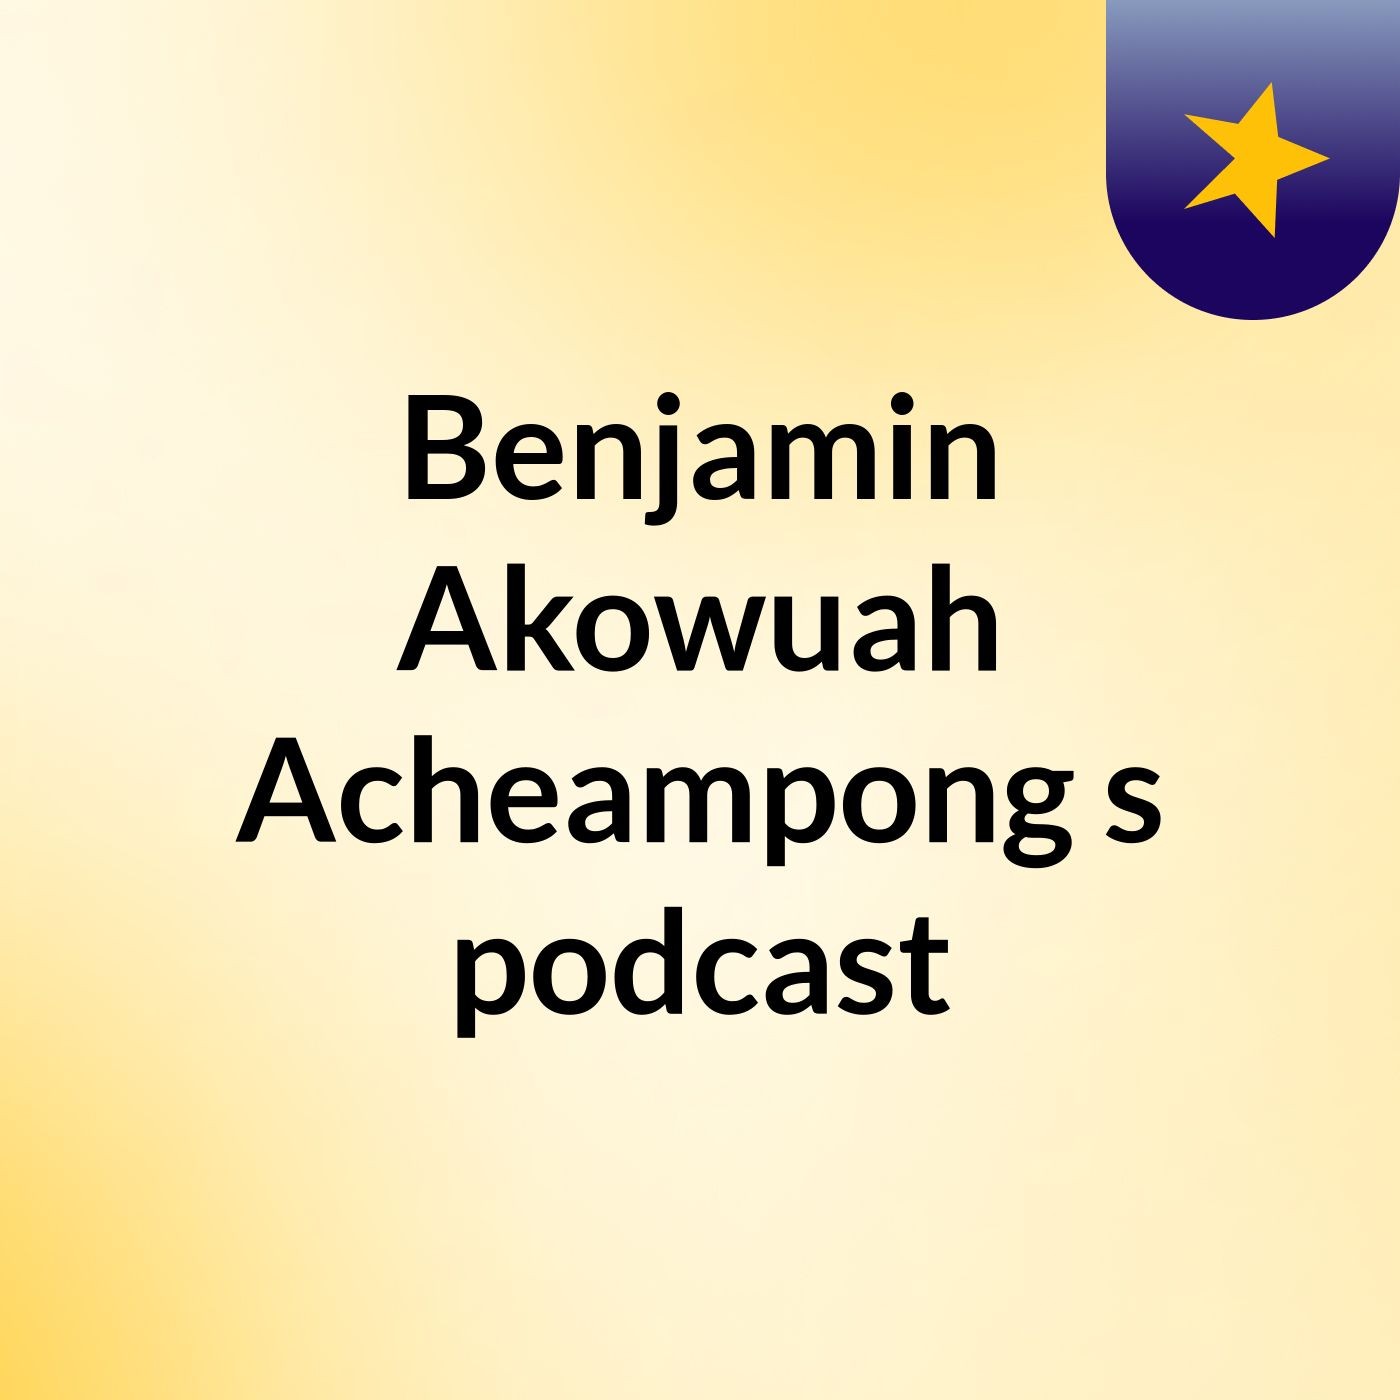 Episode 3 - Benjamin Akowuah Acheampong's podcast